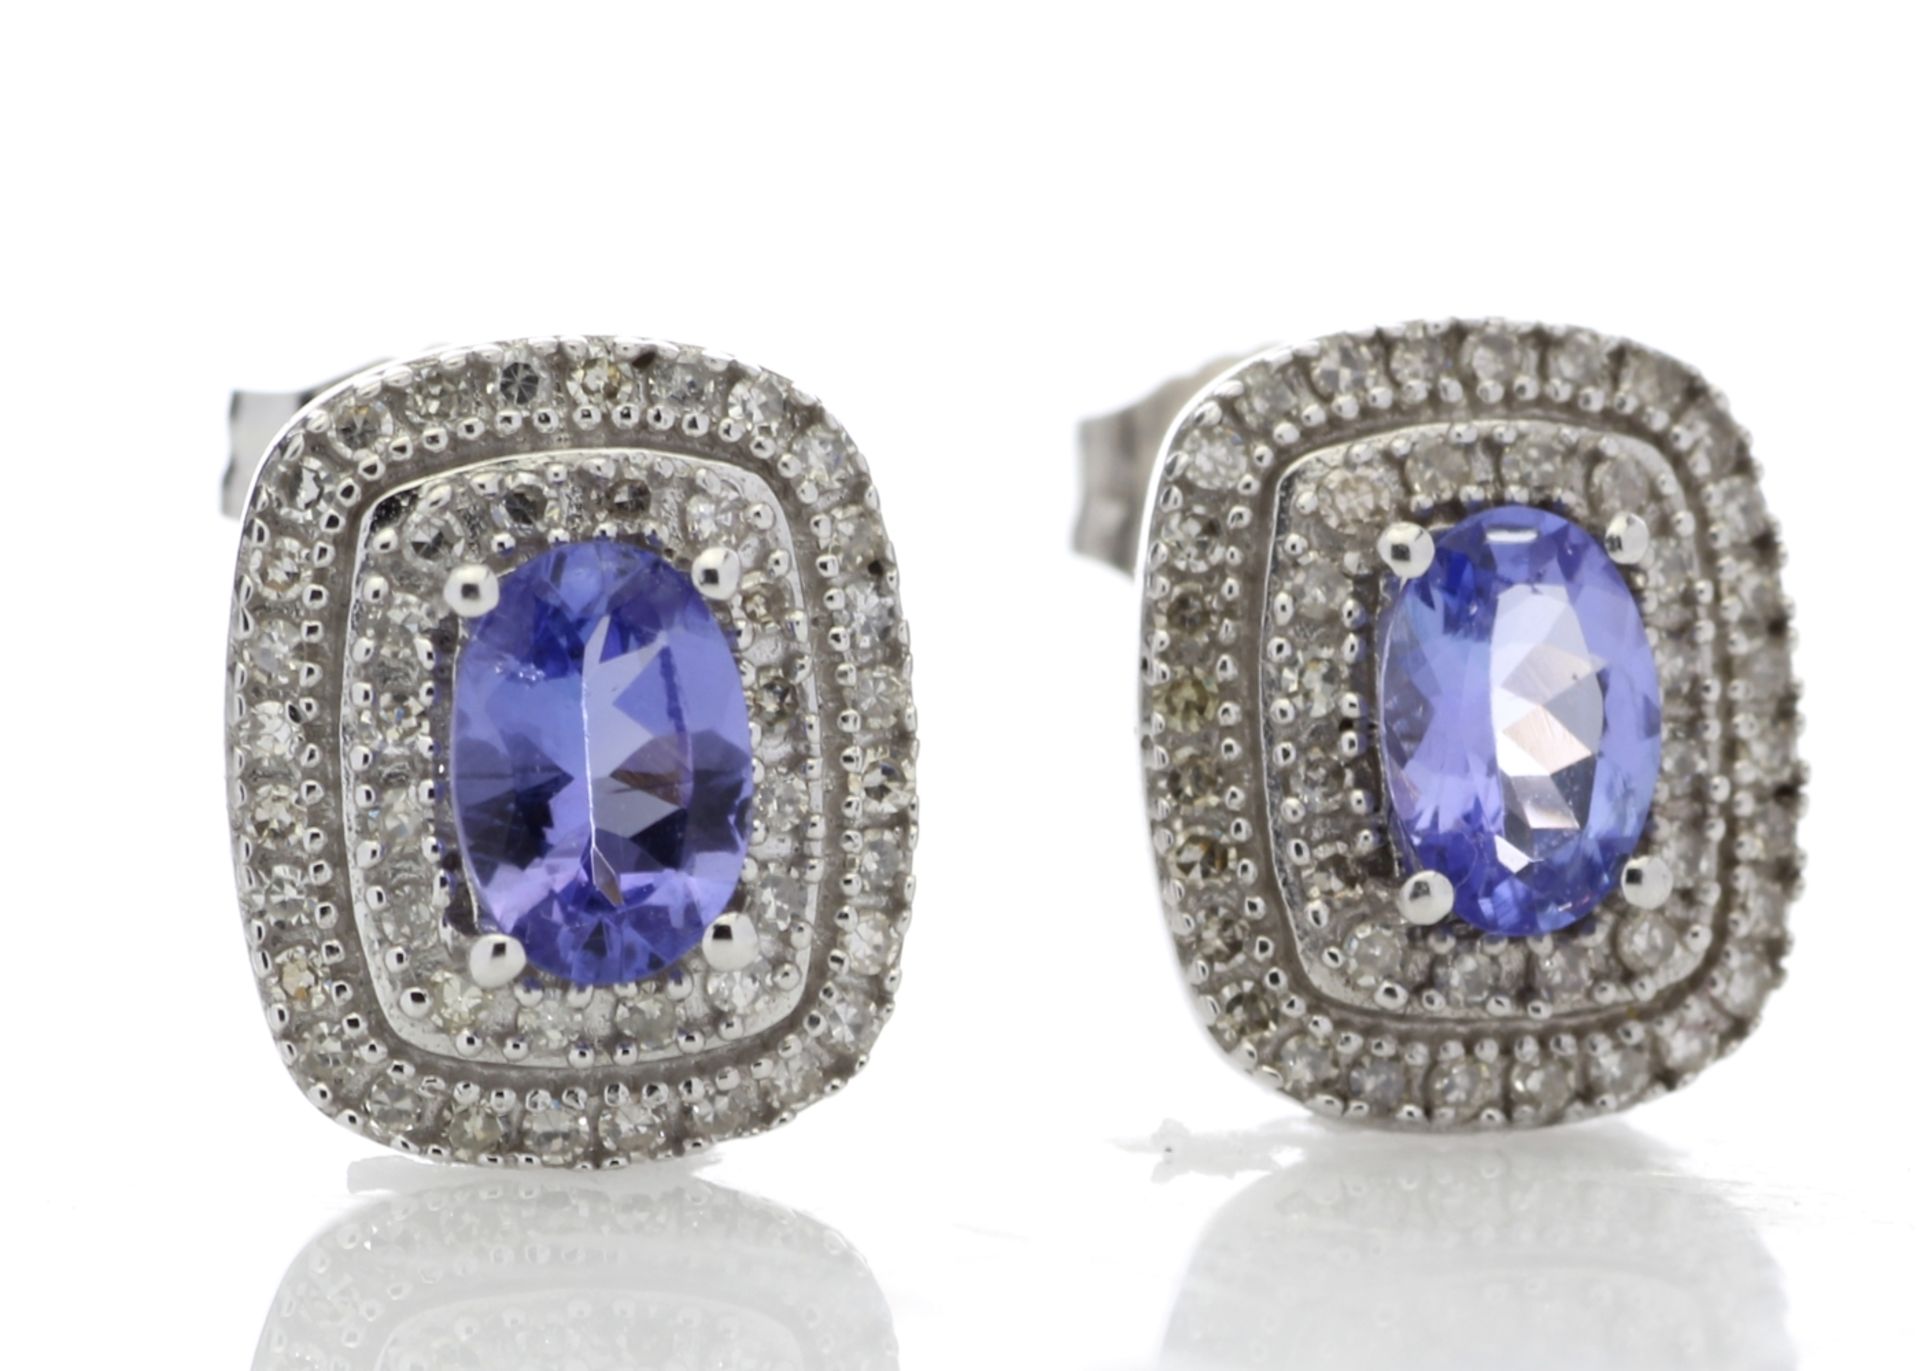 9ct White Gold Diamond And Tanzanite Halo Earrings - Image 4 of 5